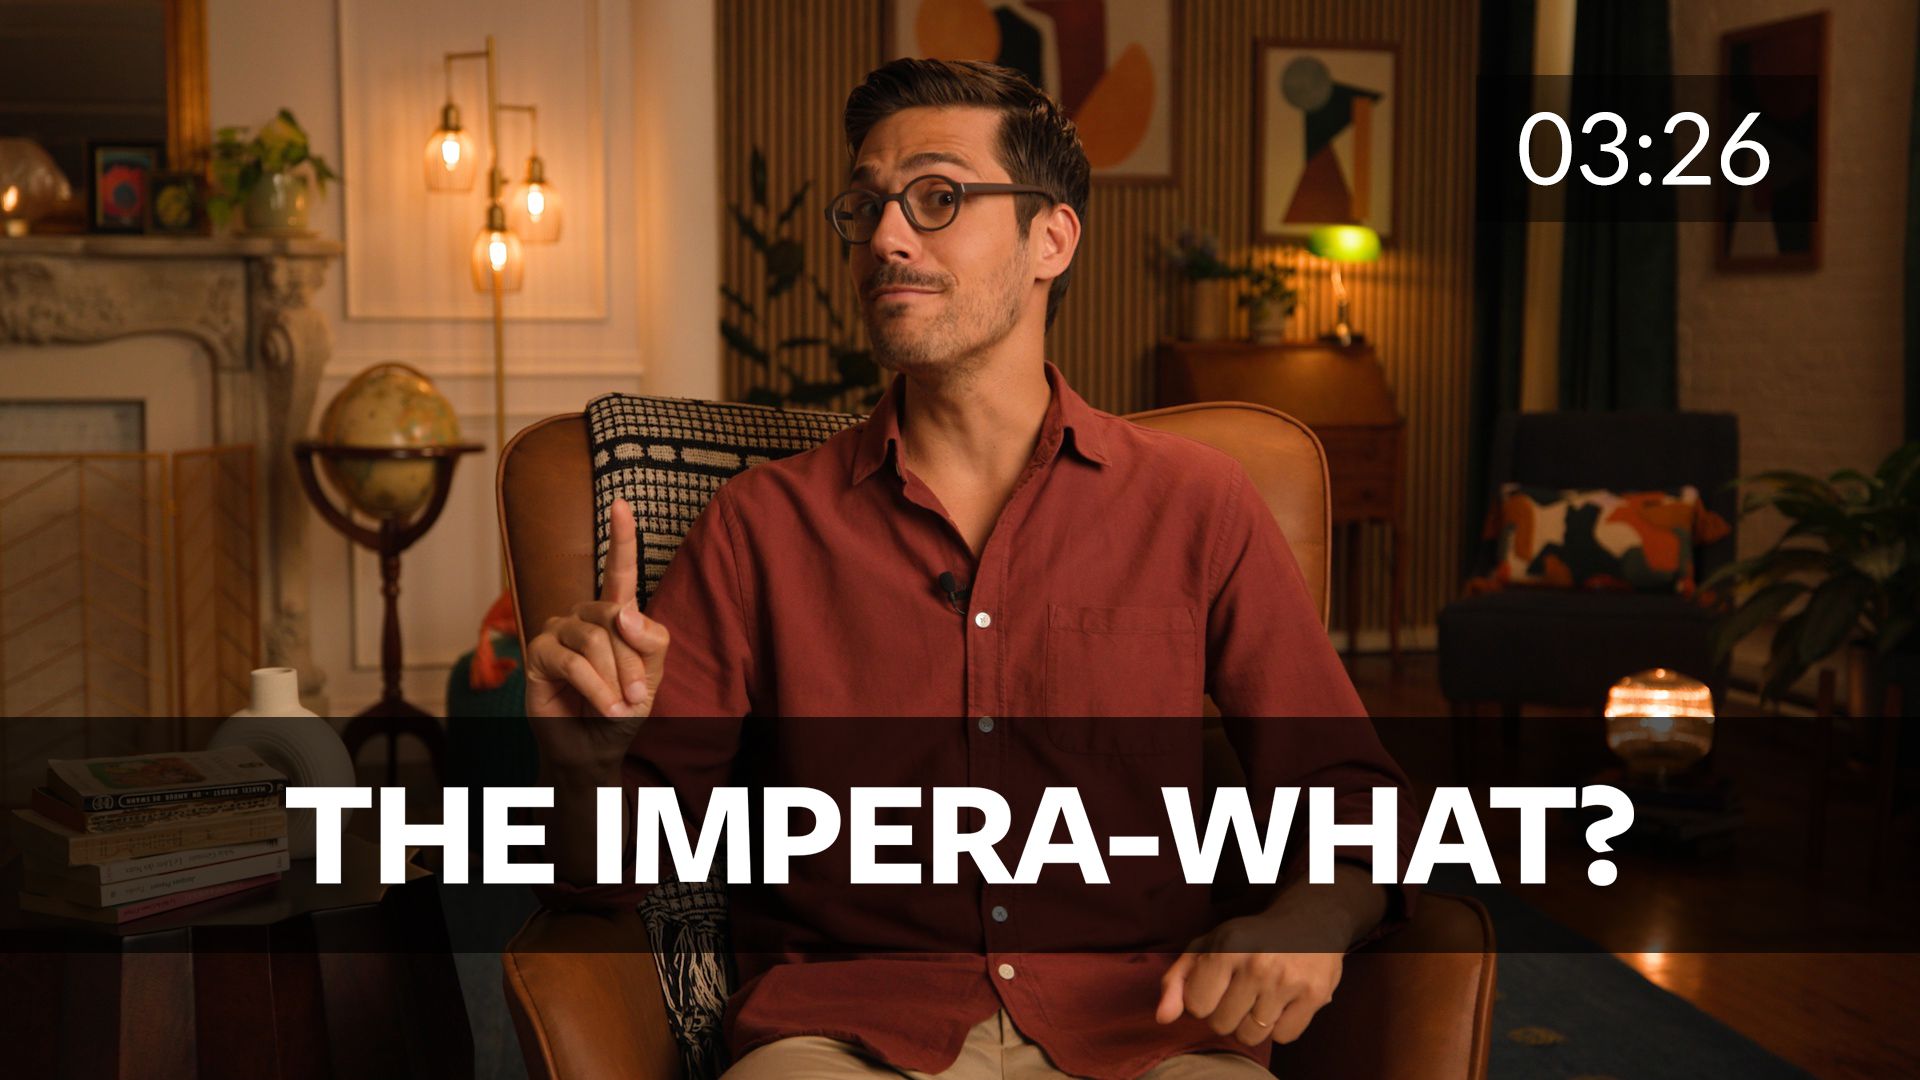 The Impera-what?